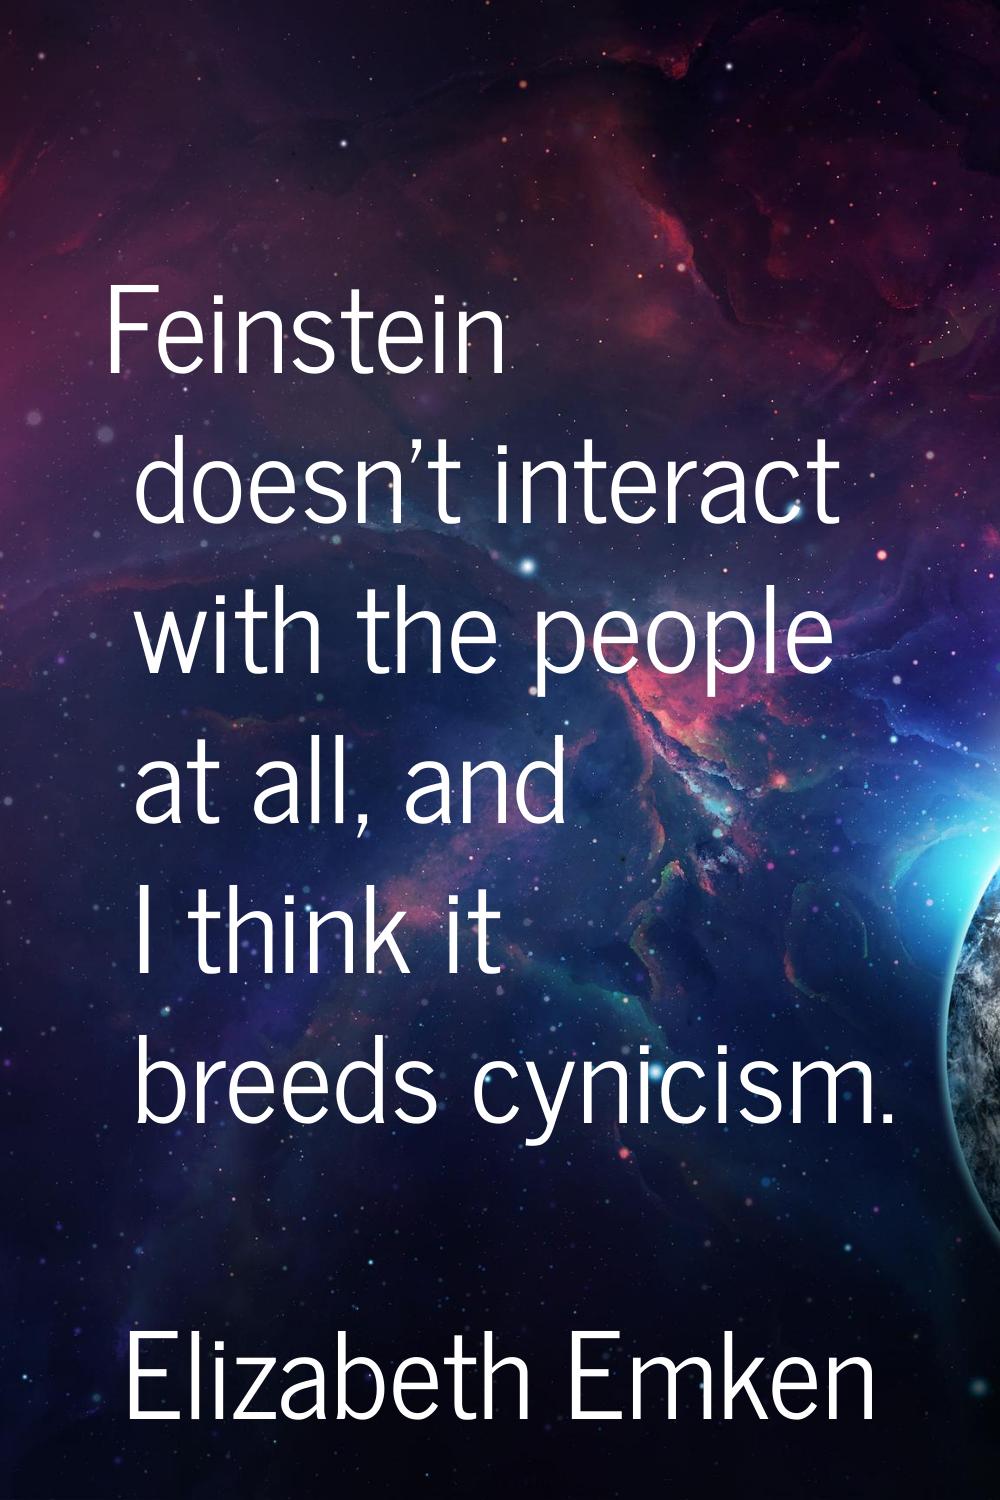 Feinstein doesn't interact with the people at all, and I think it breeds cynicism.